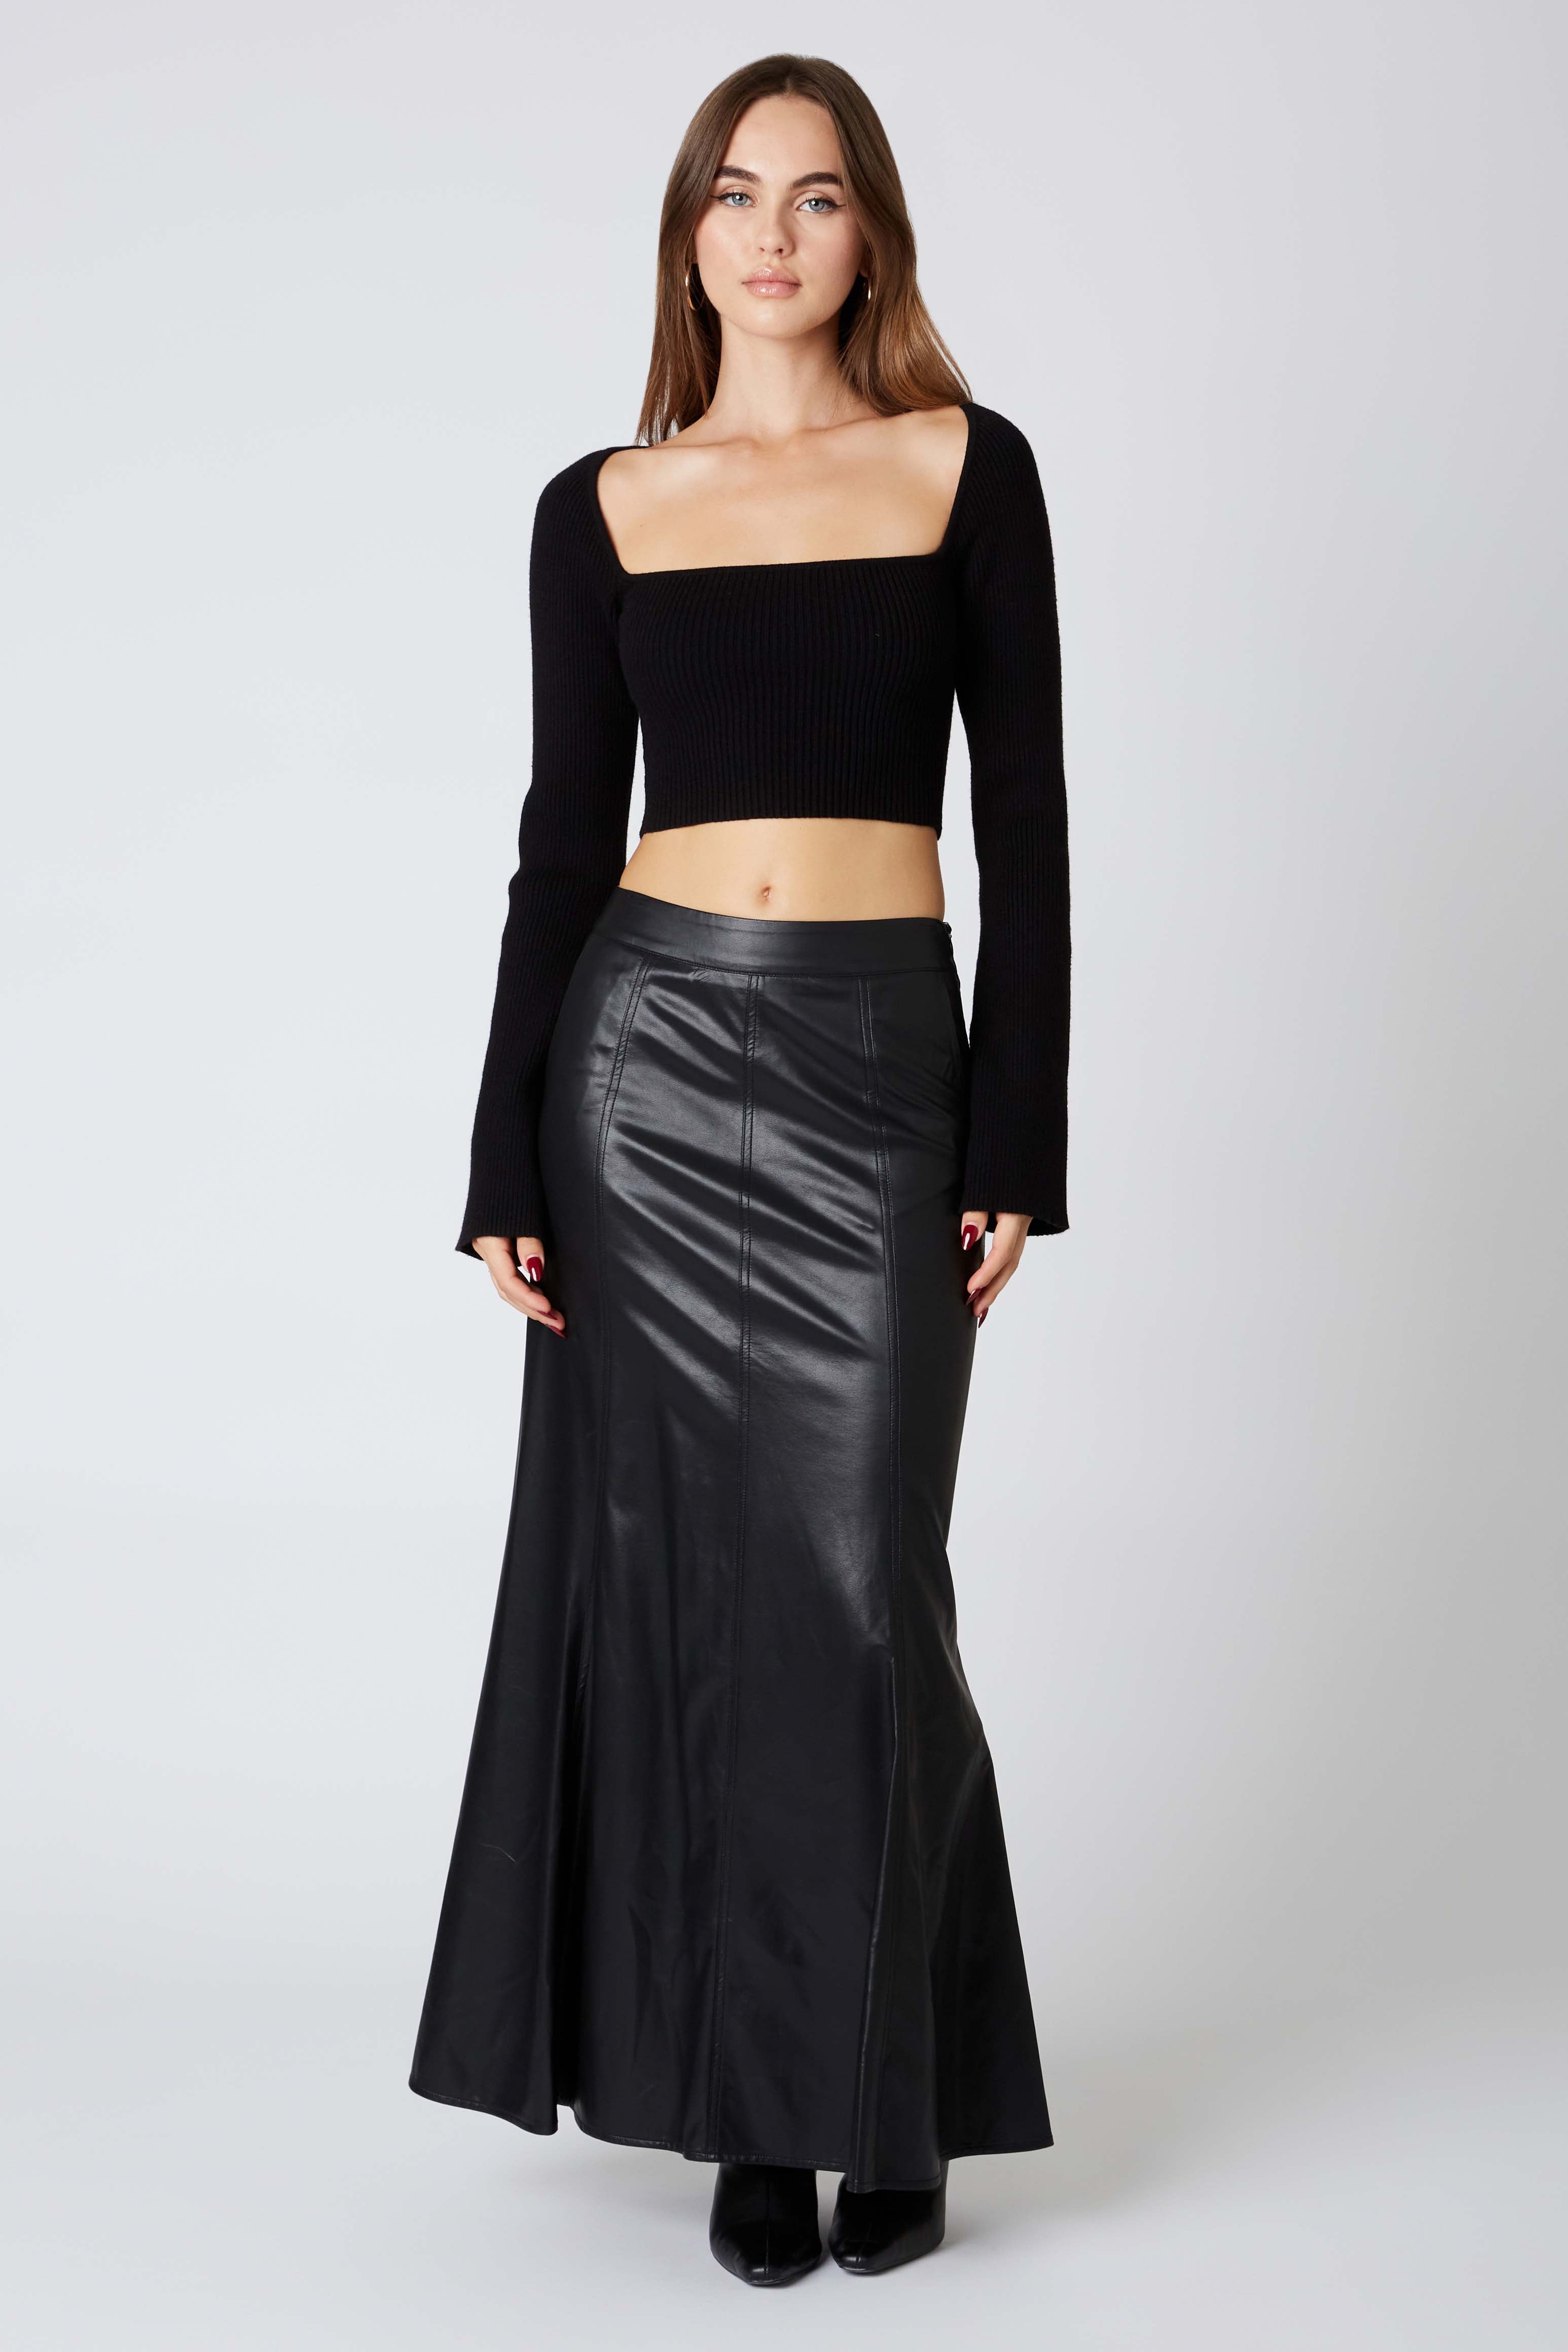 Leather Maxi Skirt in Black Front View